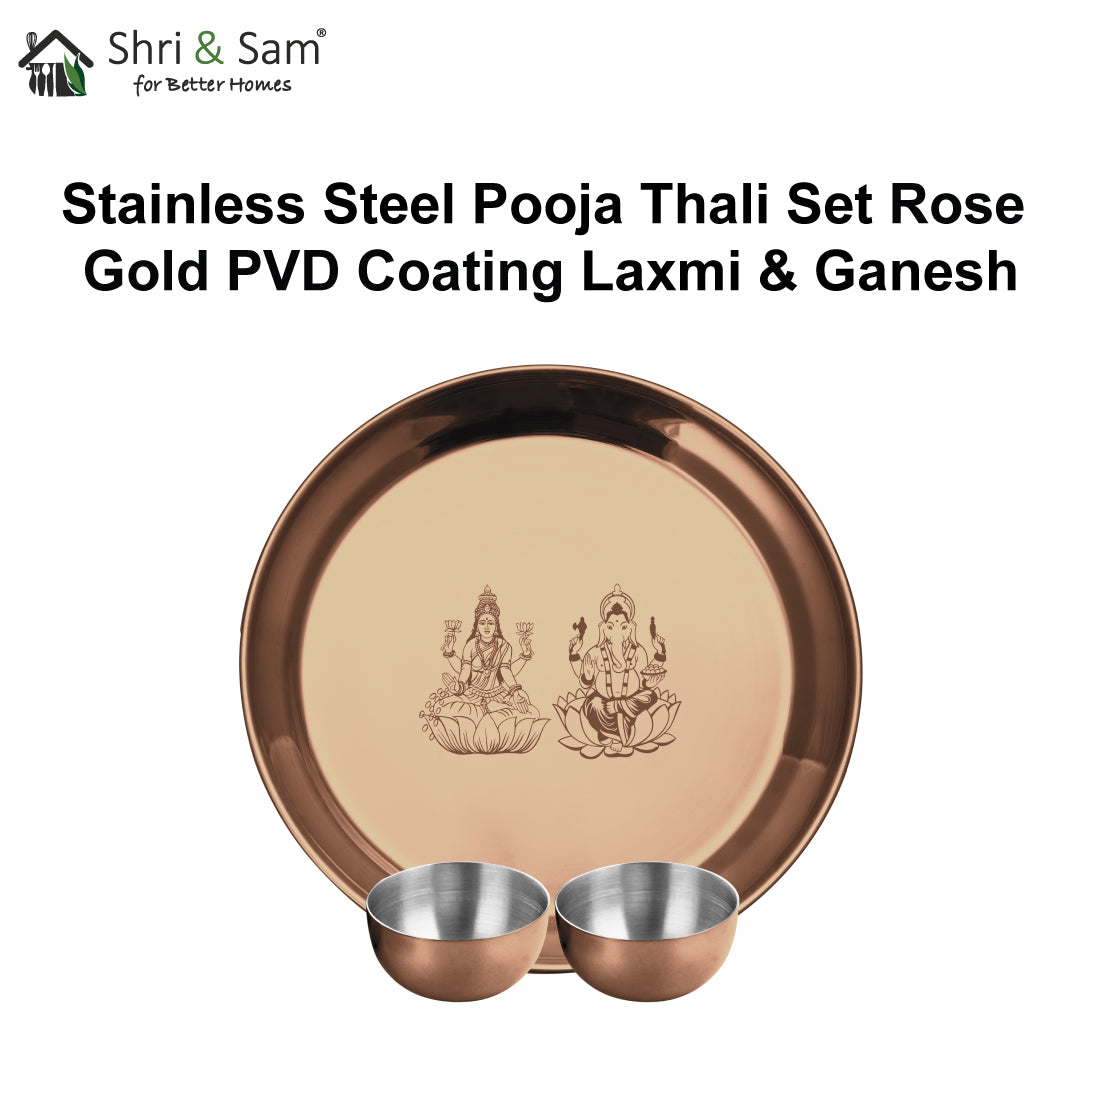 Stainless Steel Pooja Thali Set with Rose Gold PVD Coating Laxmi & Ganesh